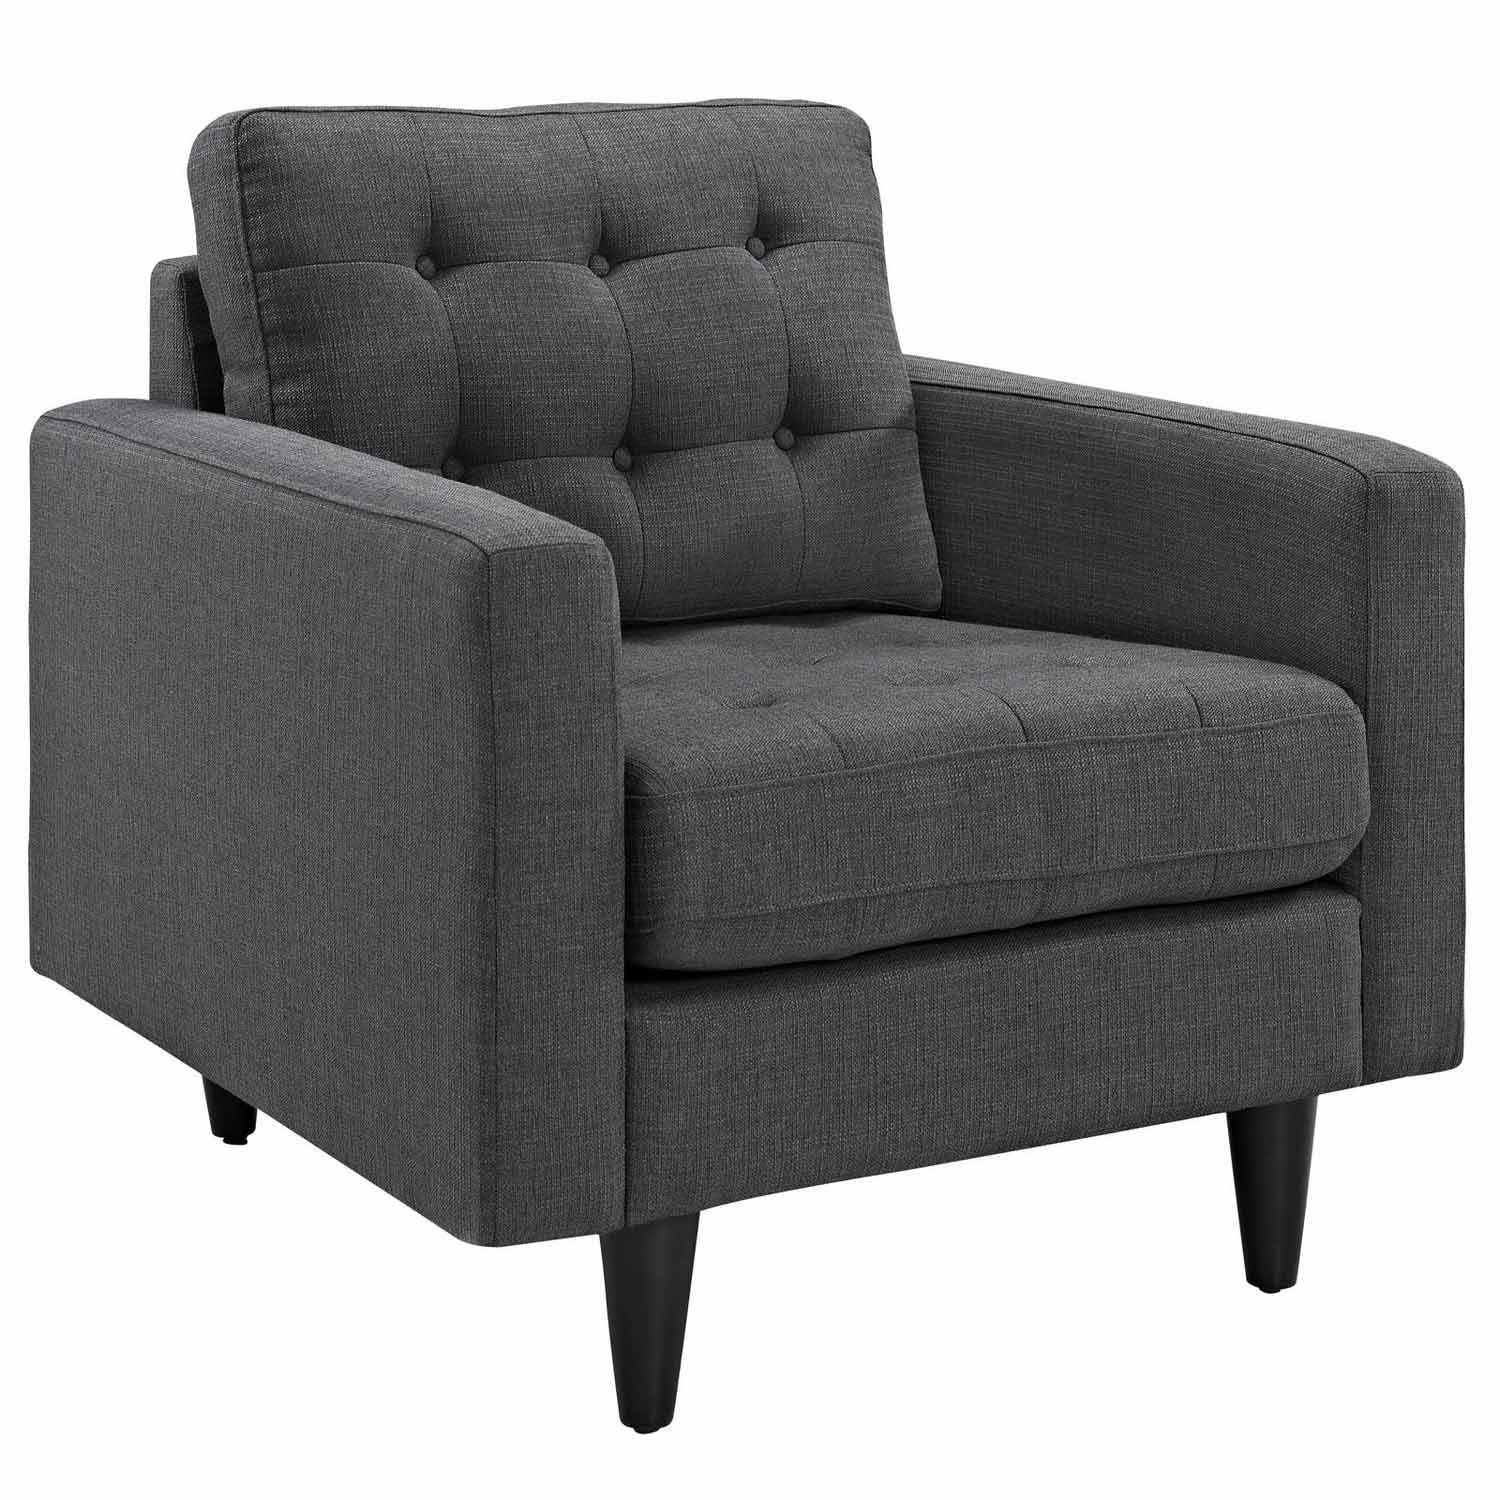 Modway Empress 3PC Sofa and Armchairs Set - Gray